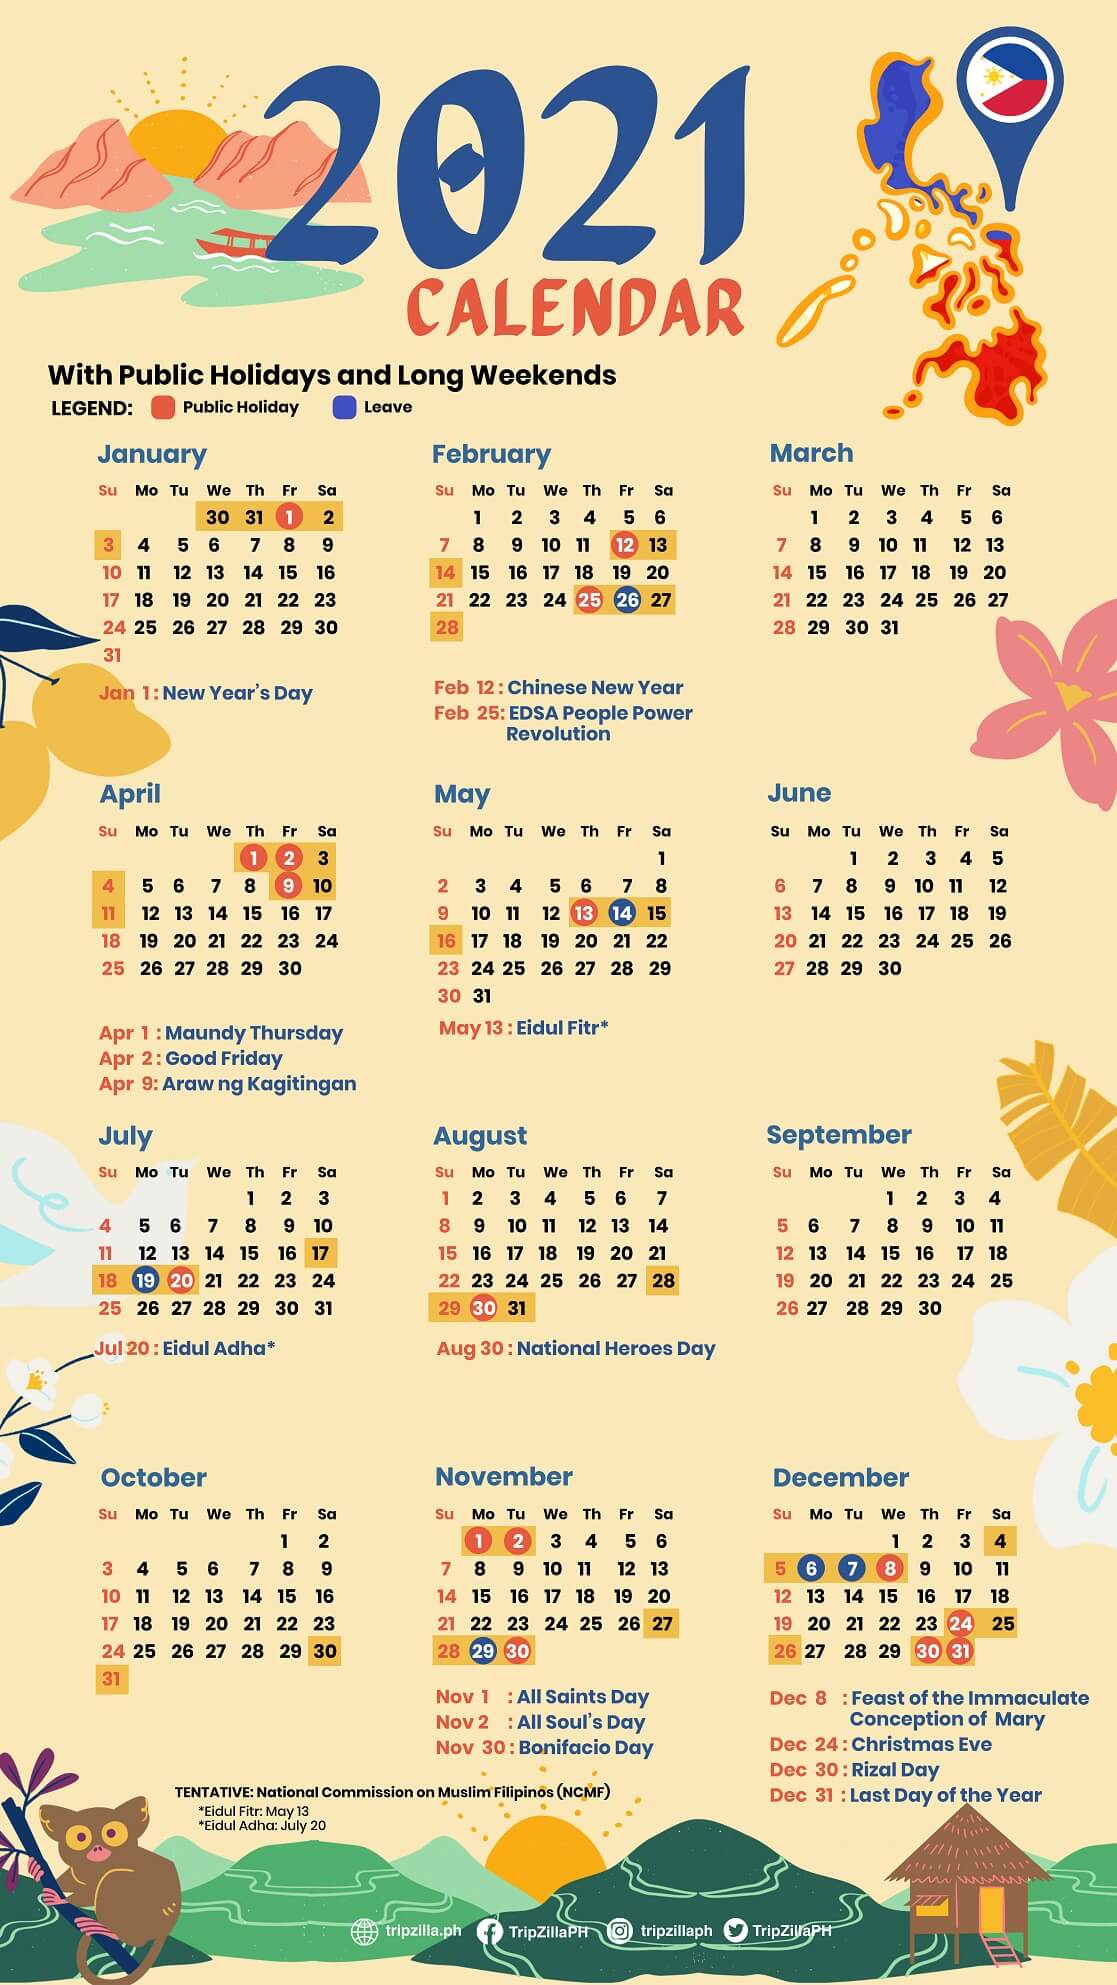 time-and-date-calendar-2021-philippines-2021-calendar-philippines-images-and-photos-finder